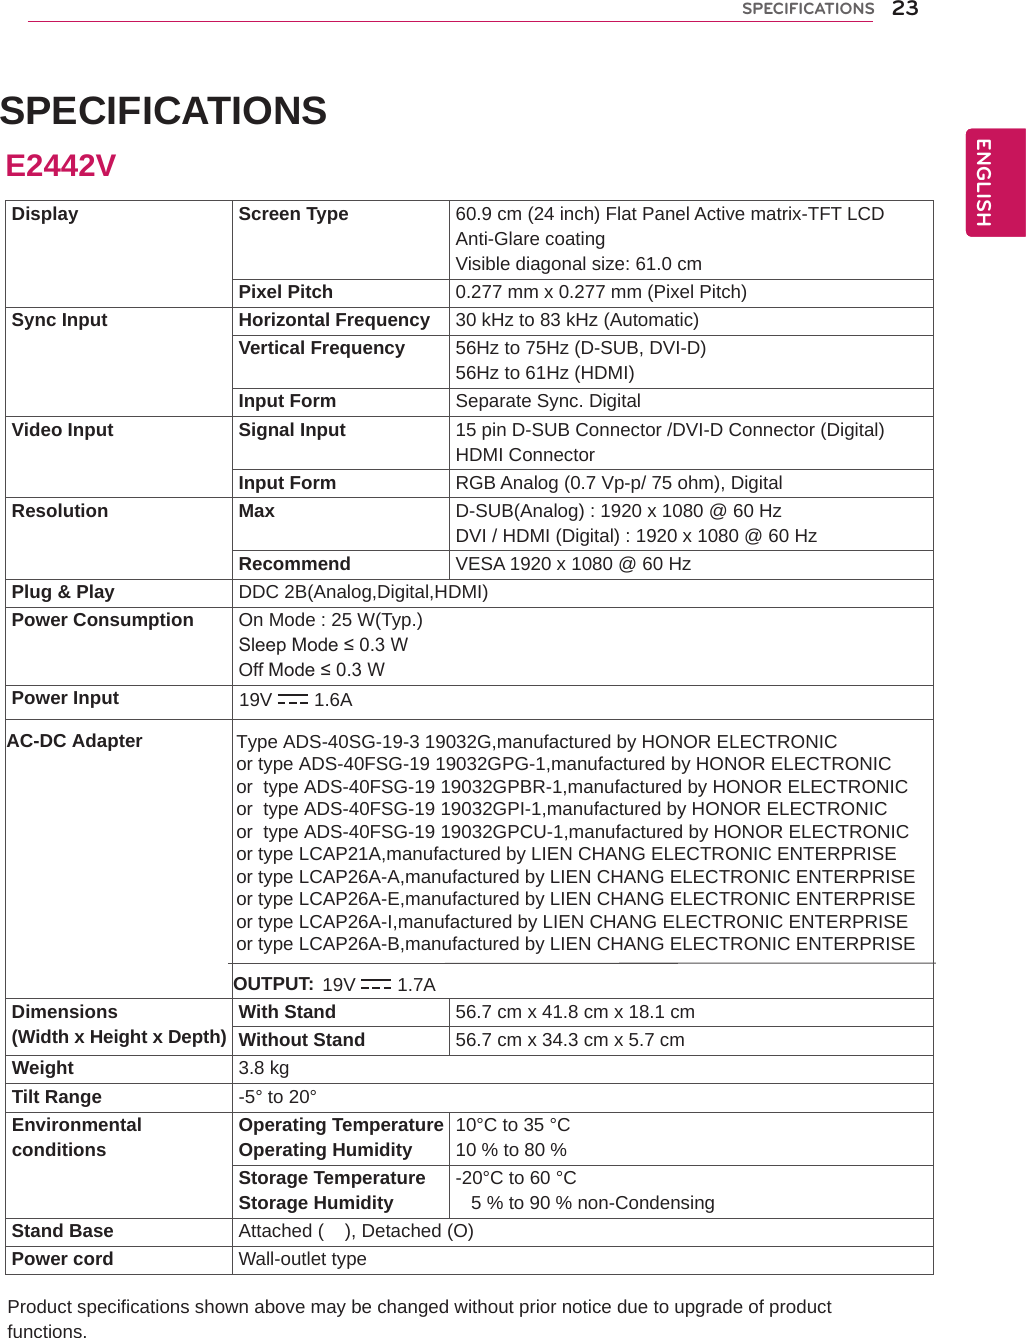  SPECIFICATIONS  Product specifications shown above may be changed without prior notice due to upgrade of product functions.Display Screen Type 60.9 cm (24 inch) Flat Panel Active matrix-TFT LCDAnti-Glare coatingVisible diagonal size: 61.0 cmPixel Pitch 0.277 mm x 0.277 mm (Pixel Pitch)Sync Input Horizontal Frequency 30 kHz to 83 kHz (Automatic)Vertical Frequency 56Hz to 75Hz (D-SUB, DVI-D)56Hz to 61Hz (HDMI)Input Form Separate Sync. DigitalVideo Input Signal Input 15 pin D-SUB Connector /DVI-D Connector (Digital)HDMI ConnectorInput Form RGB Analog (0.7 Vp-p/ 75 ohm), DigitalResolution Max D-SUB(Analog) : 1920 x 1080 @ 60 HzDVI / HDMI (Digital) : 1920 x 1080 @ 60 HzRecommend VESA 1920 x 1080 @ 60 HzPlug &amp; Play DDC 2B(Analog,Digital,HDMI)Power Consumption On Mode : 25 W(Typ.)Sleep Mode ≤ 0.3 W Off Mode ≤ 0.3 W Power InputDimensions(Width x Height x Depth) With Stand 56.7 cm x 41.8 cm x 18.1 cmWithout Stand 56.7 cm x 34.3 cm x 5.7 cmWeight 3.8 kgTilt Range -5° to 20°Environmentalconditions Operating TemperatureOperating Humidity 10°C to 35 °C10 % to 80 % Storage TemperatureStorage Humidity -20°C to 60 °C   5 % to 90 % non-CondensingStand Base Attached (    ), Detached (O)Power cord Wall-outlet typeE2442V19V 1.6AAC-DC Adapter Type ADS-40SG-19-3 19032G,manufactured by HONOR ELECTRONICor type ADS-40FSG-19 19032GPG-1,manufactured by HONOR ELECTRONICor  type ADS-40FSG-19 19032GPBR-1,manufactured by HONOR ELECTRONICor  type ADS-40FSG-19 19032GPI-1,manufactured by HONOR ELECTRONIC or  type ADS-40FSG-19 19032GPCU-1,manufactured by HONOR ELECTRONIC or type LCAP21A,manufactured by LIEN CHANG ELECTRONIC ENTERPRISEor type LCAP26A-A,manufactured by LIEN CHANG ELECTRONIC ENTERPRISEor type LCAP26A-E,manufactured by LIEN CHANG ELECTRONIC ENTERPRISEor type LCAP26A-I,manufactured by LIEN CHANG ELECTRONIC ENTERPRISEor type LCAP26A-B,manufactured by LIEN CHANG ELECTRONIC ENTERPRISEOUTPUT: 19V 1.7A23ENGENGLISHSPECIFICATIONS